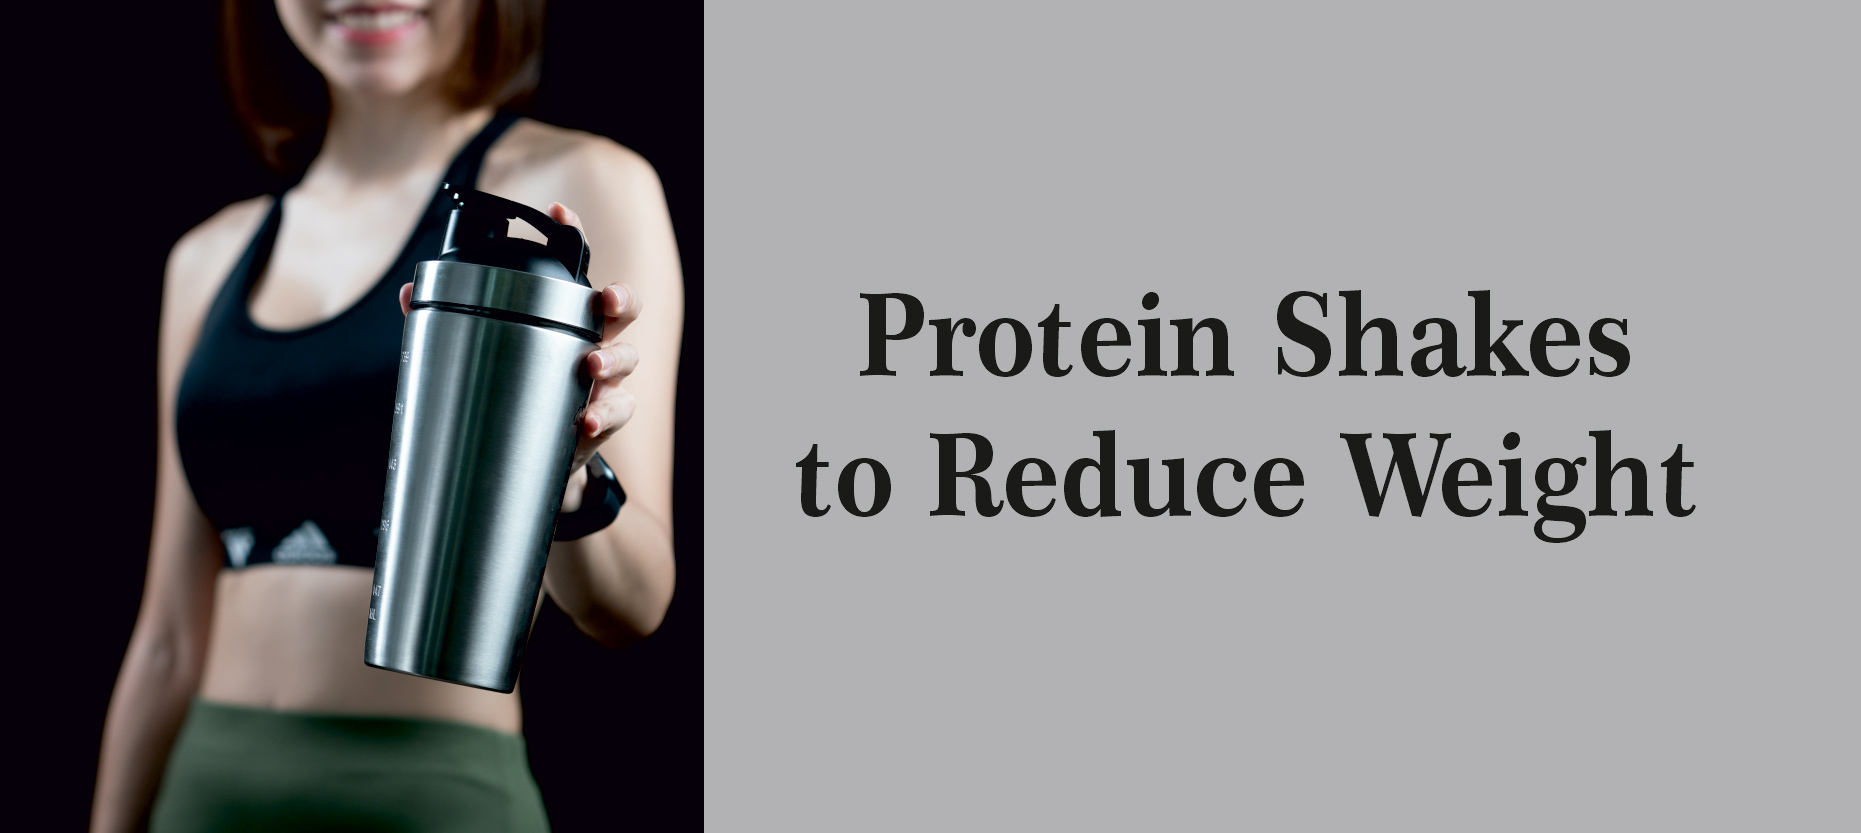 Can Protein Shakes Help You Lose Weight